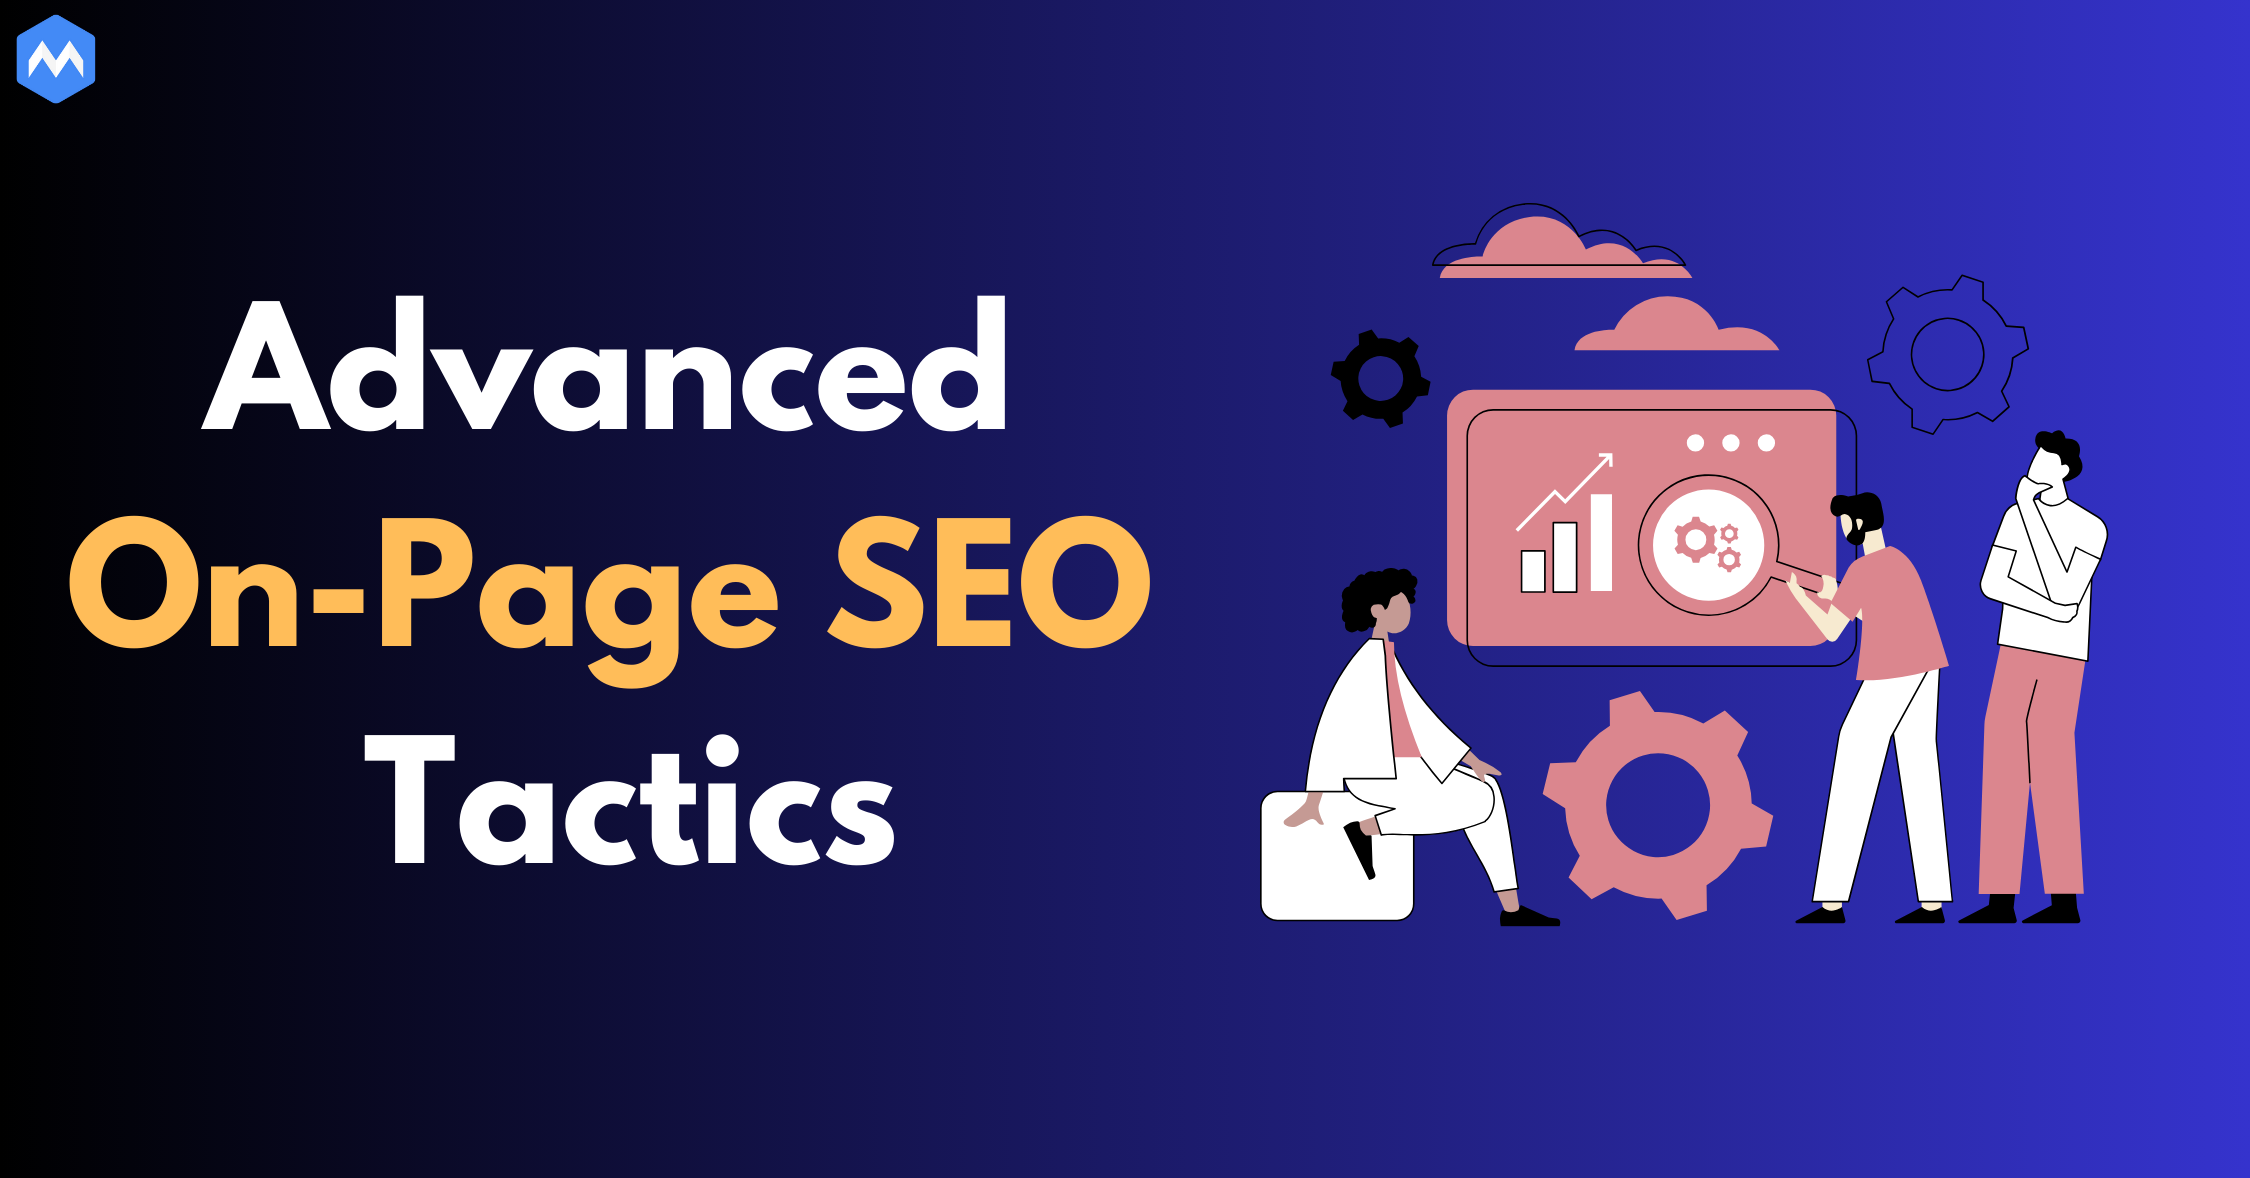 The ultimate guide to advanced On-Page SEO Tactics